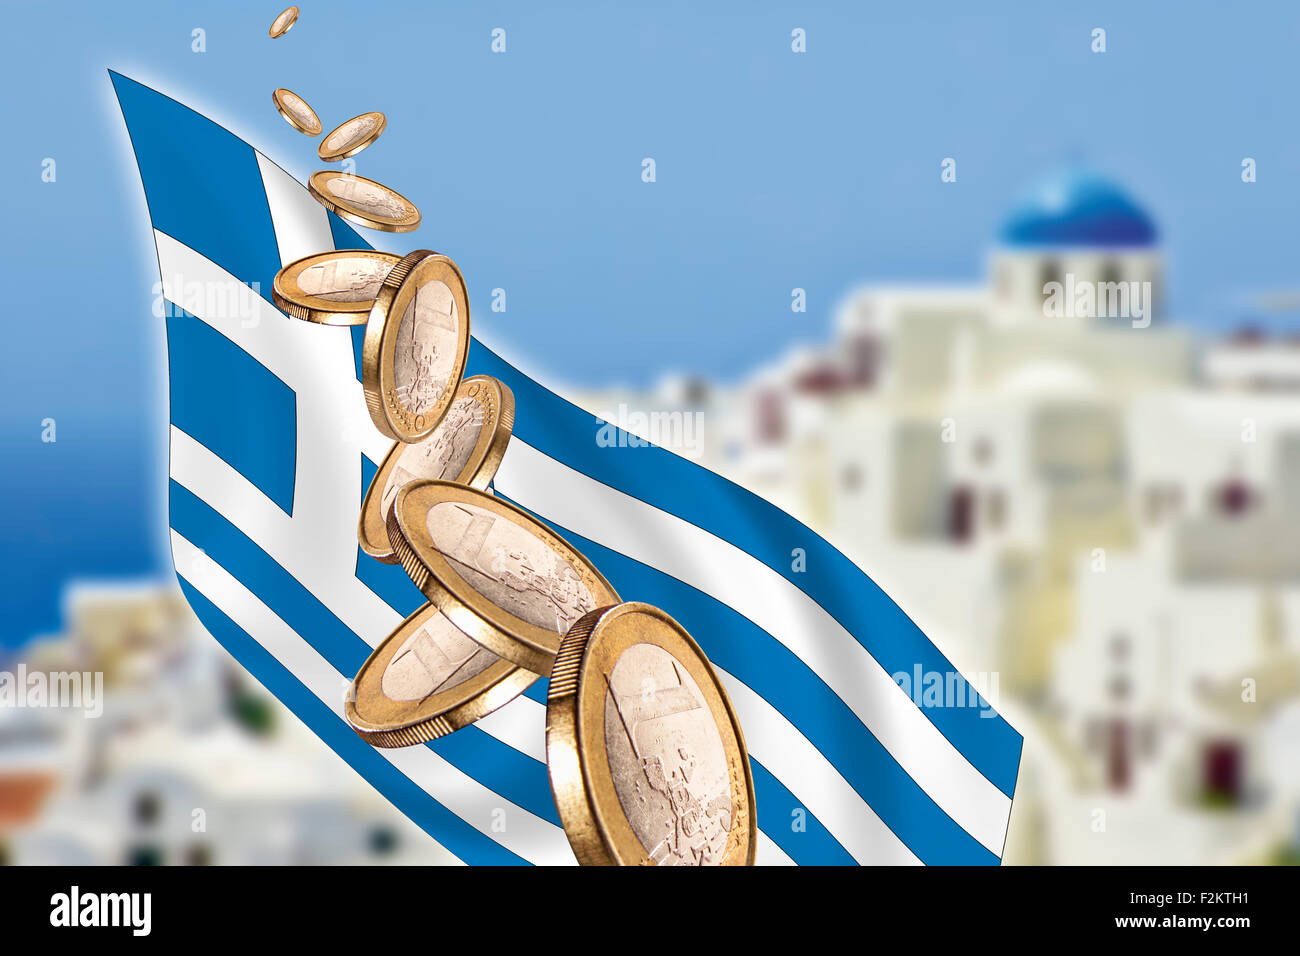 Symbolic picture, Greece, Grexit, banking crisis, Euro coins, flag, Santorini in background Stock Photo